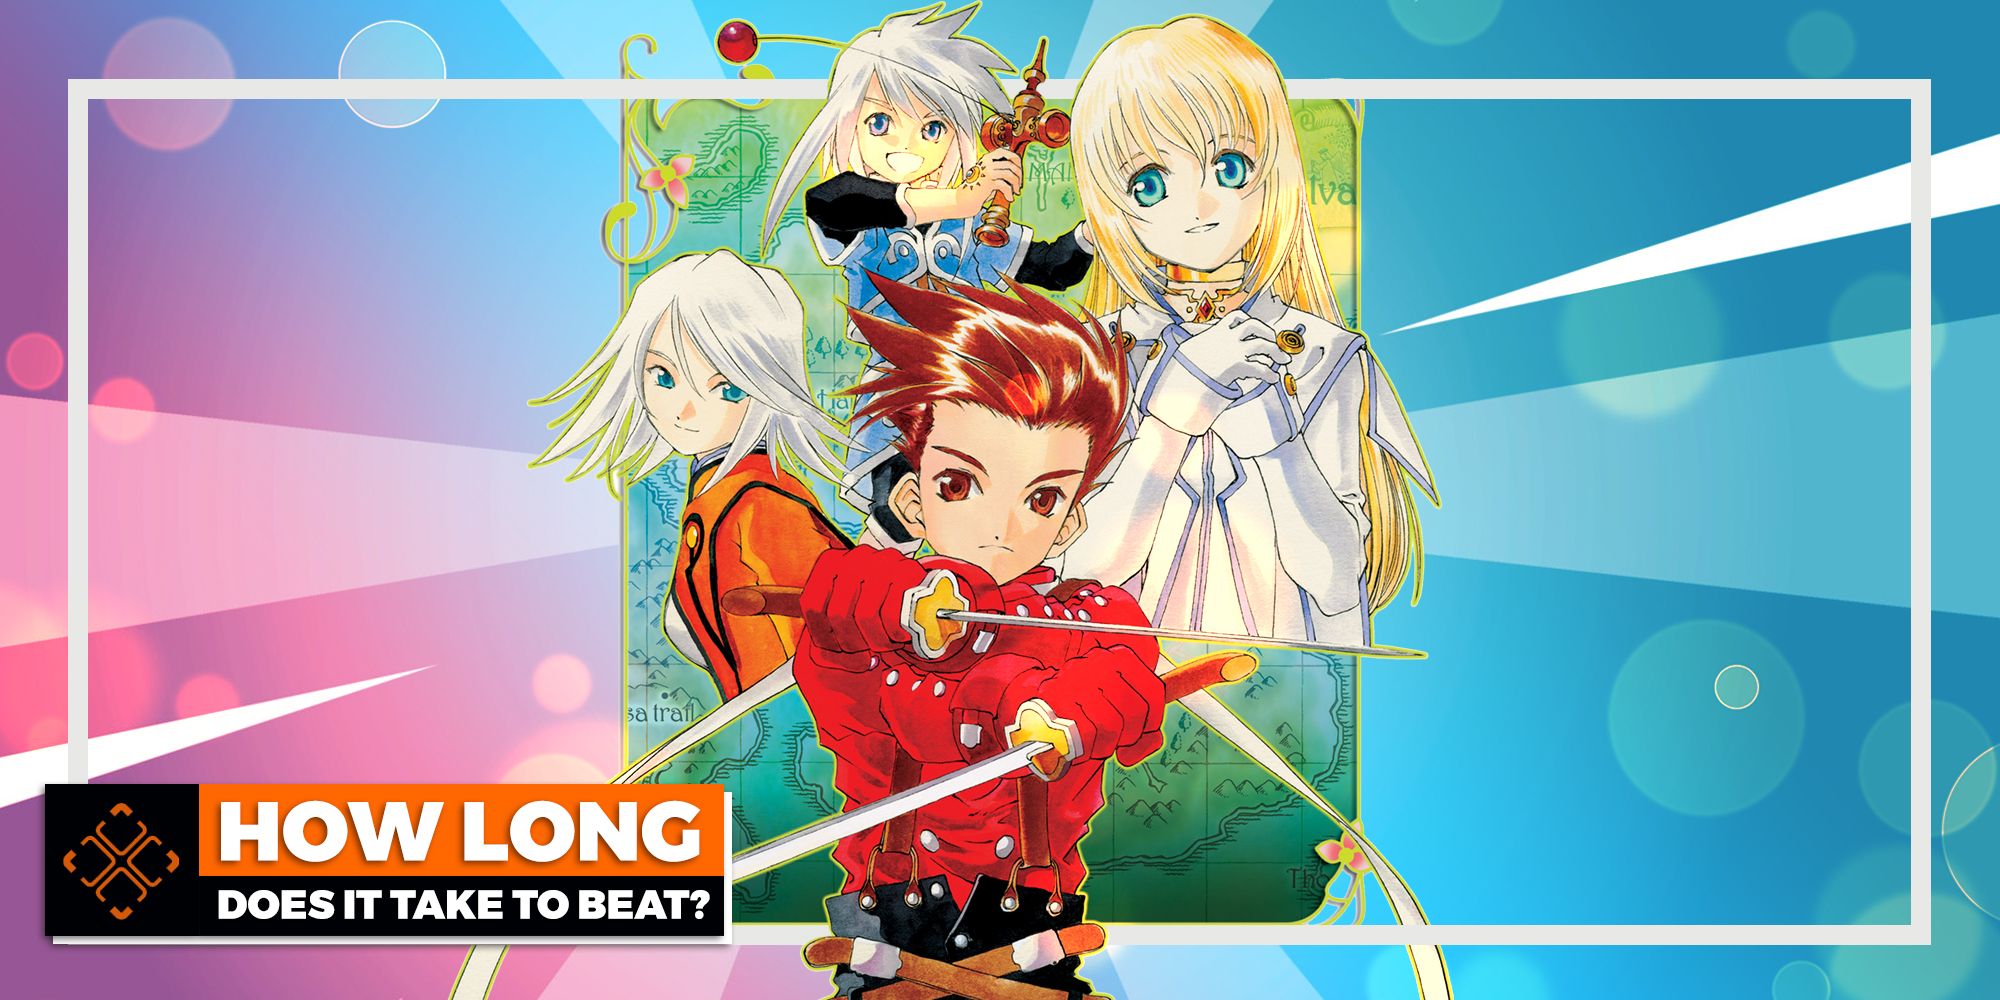 Game art from Tales Of Symphonia.